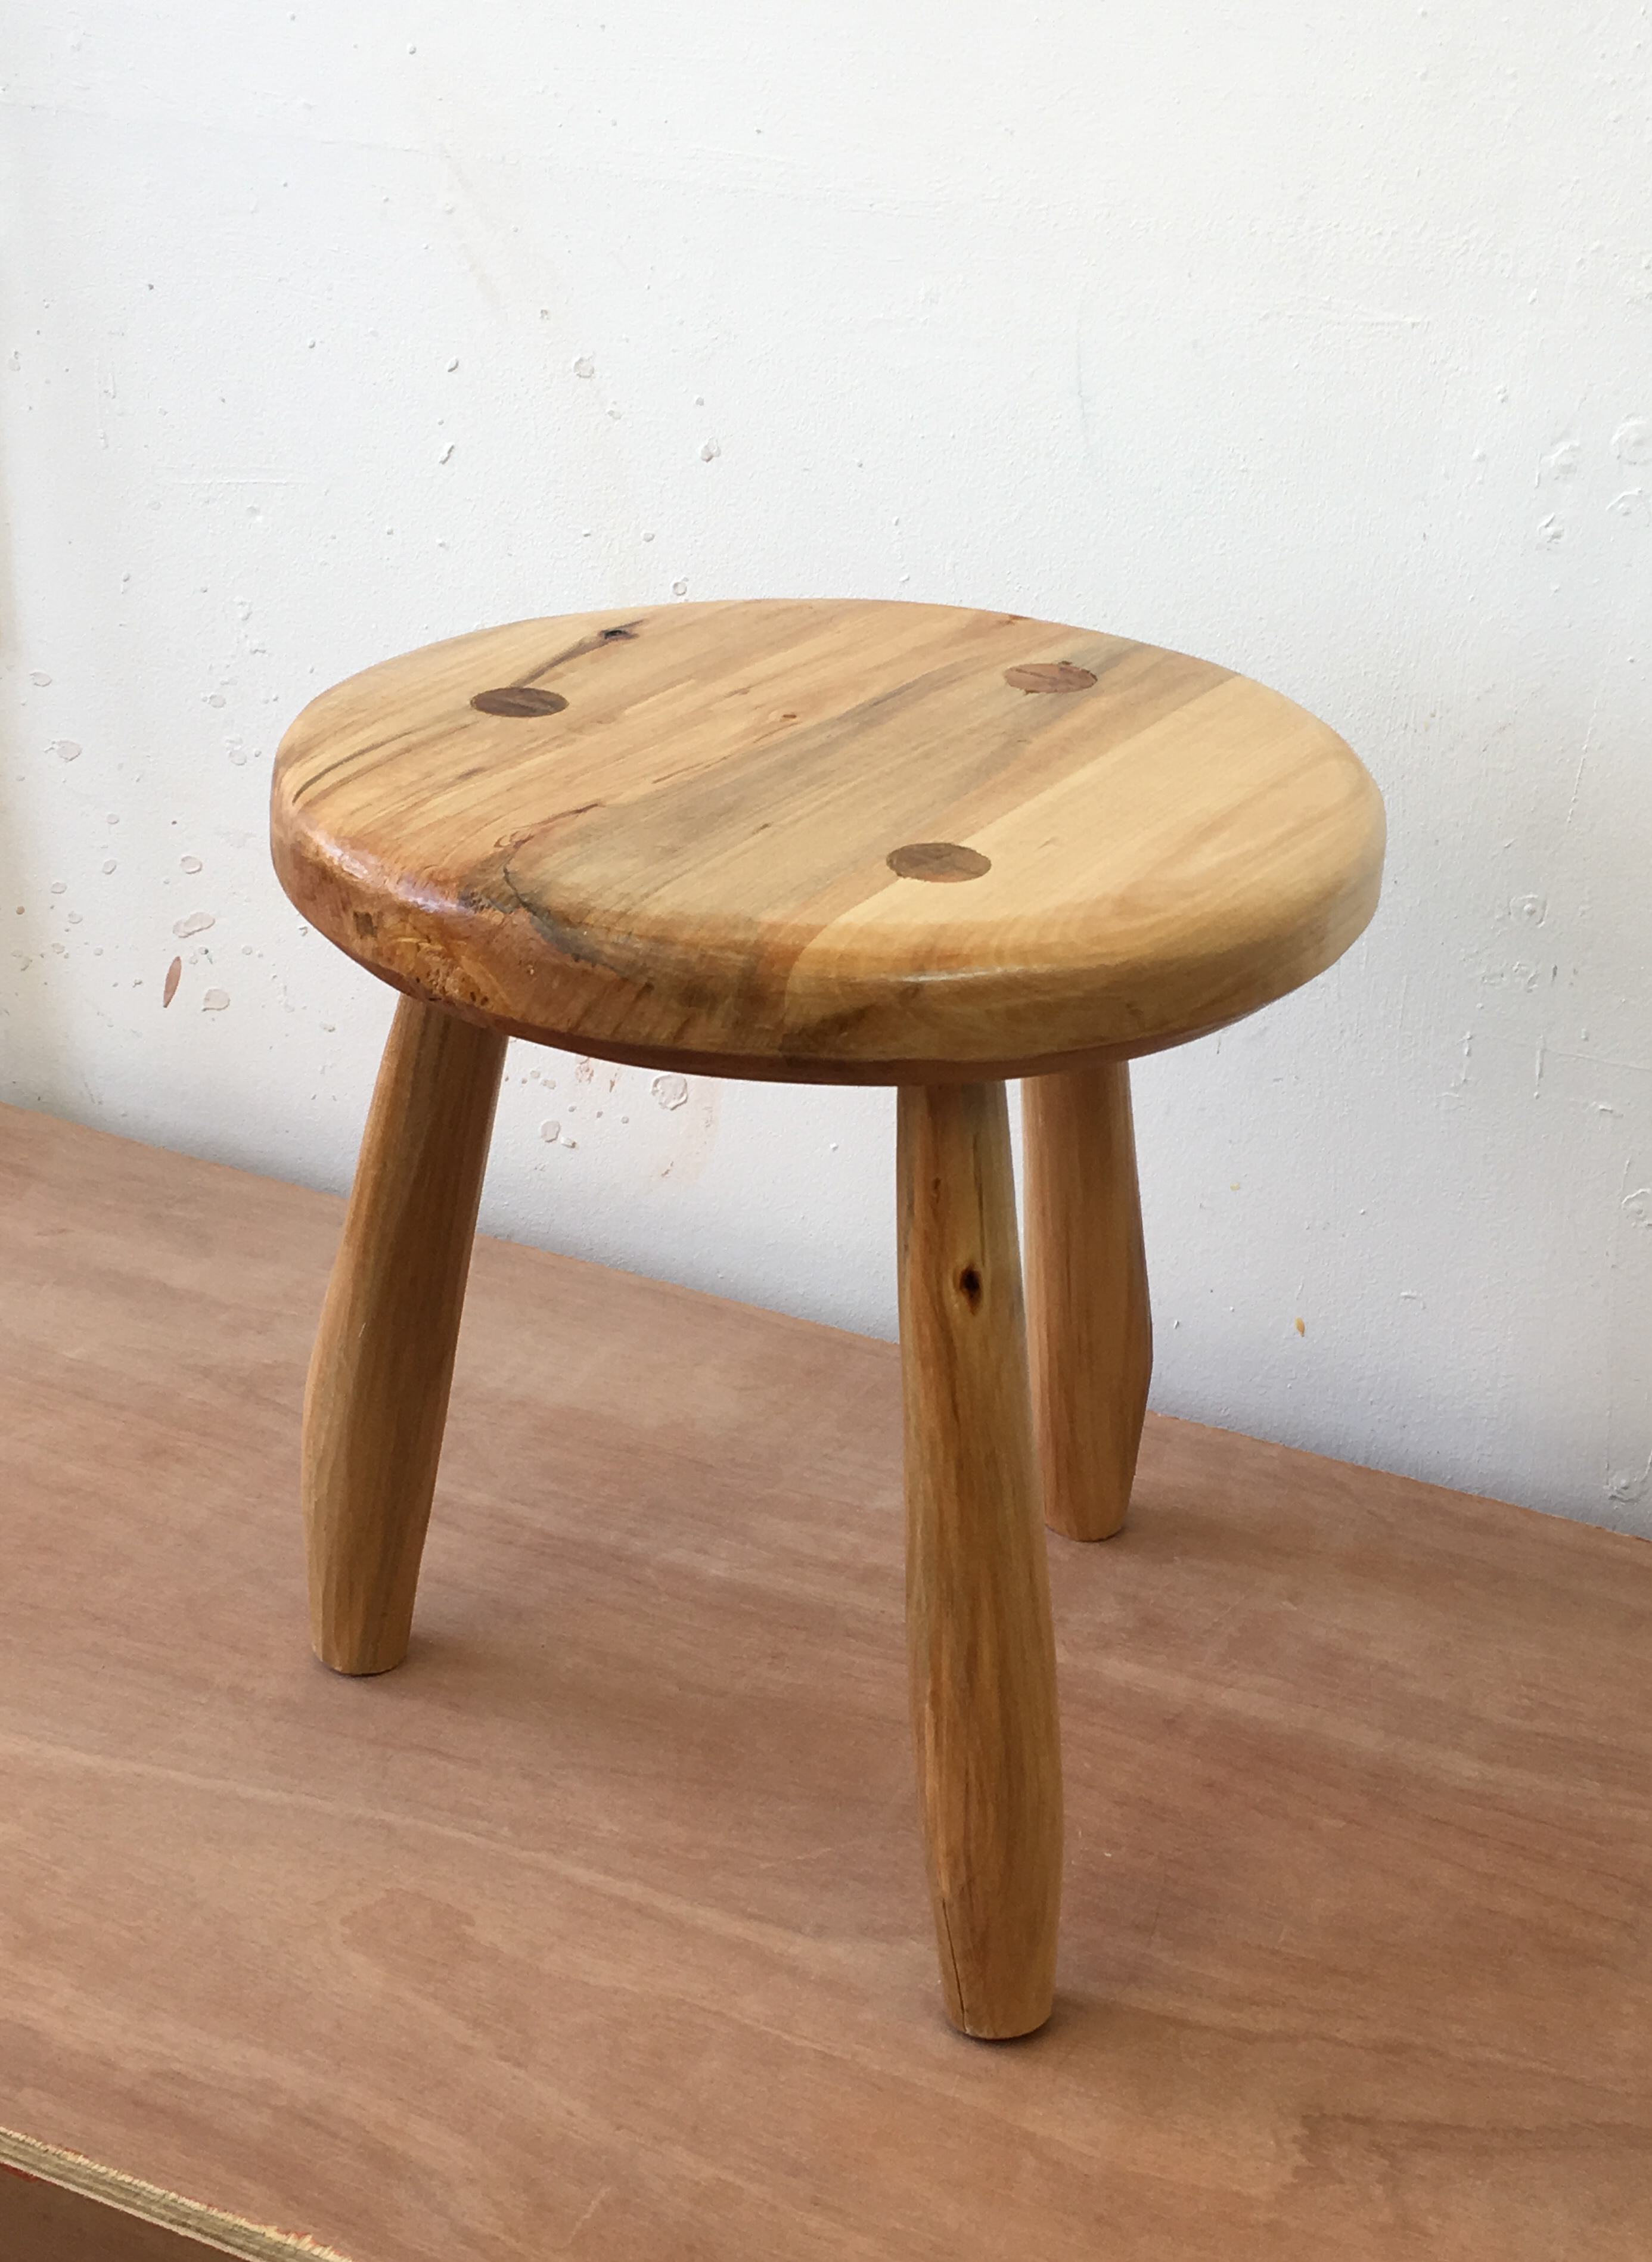 Milking Stool by ccguest